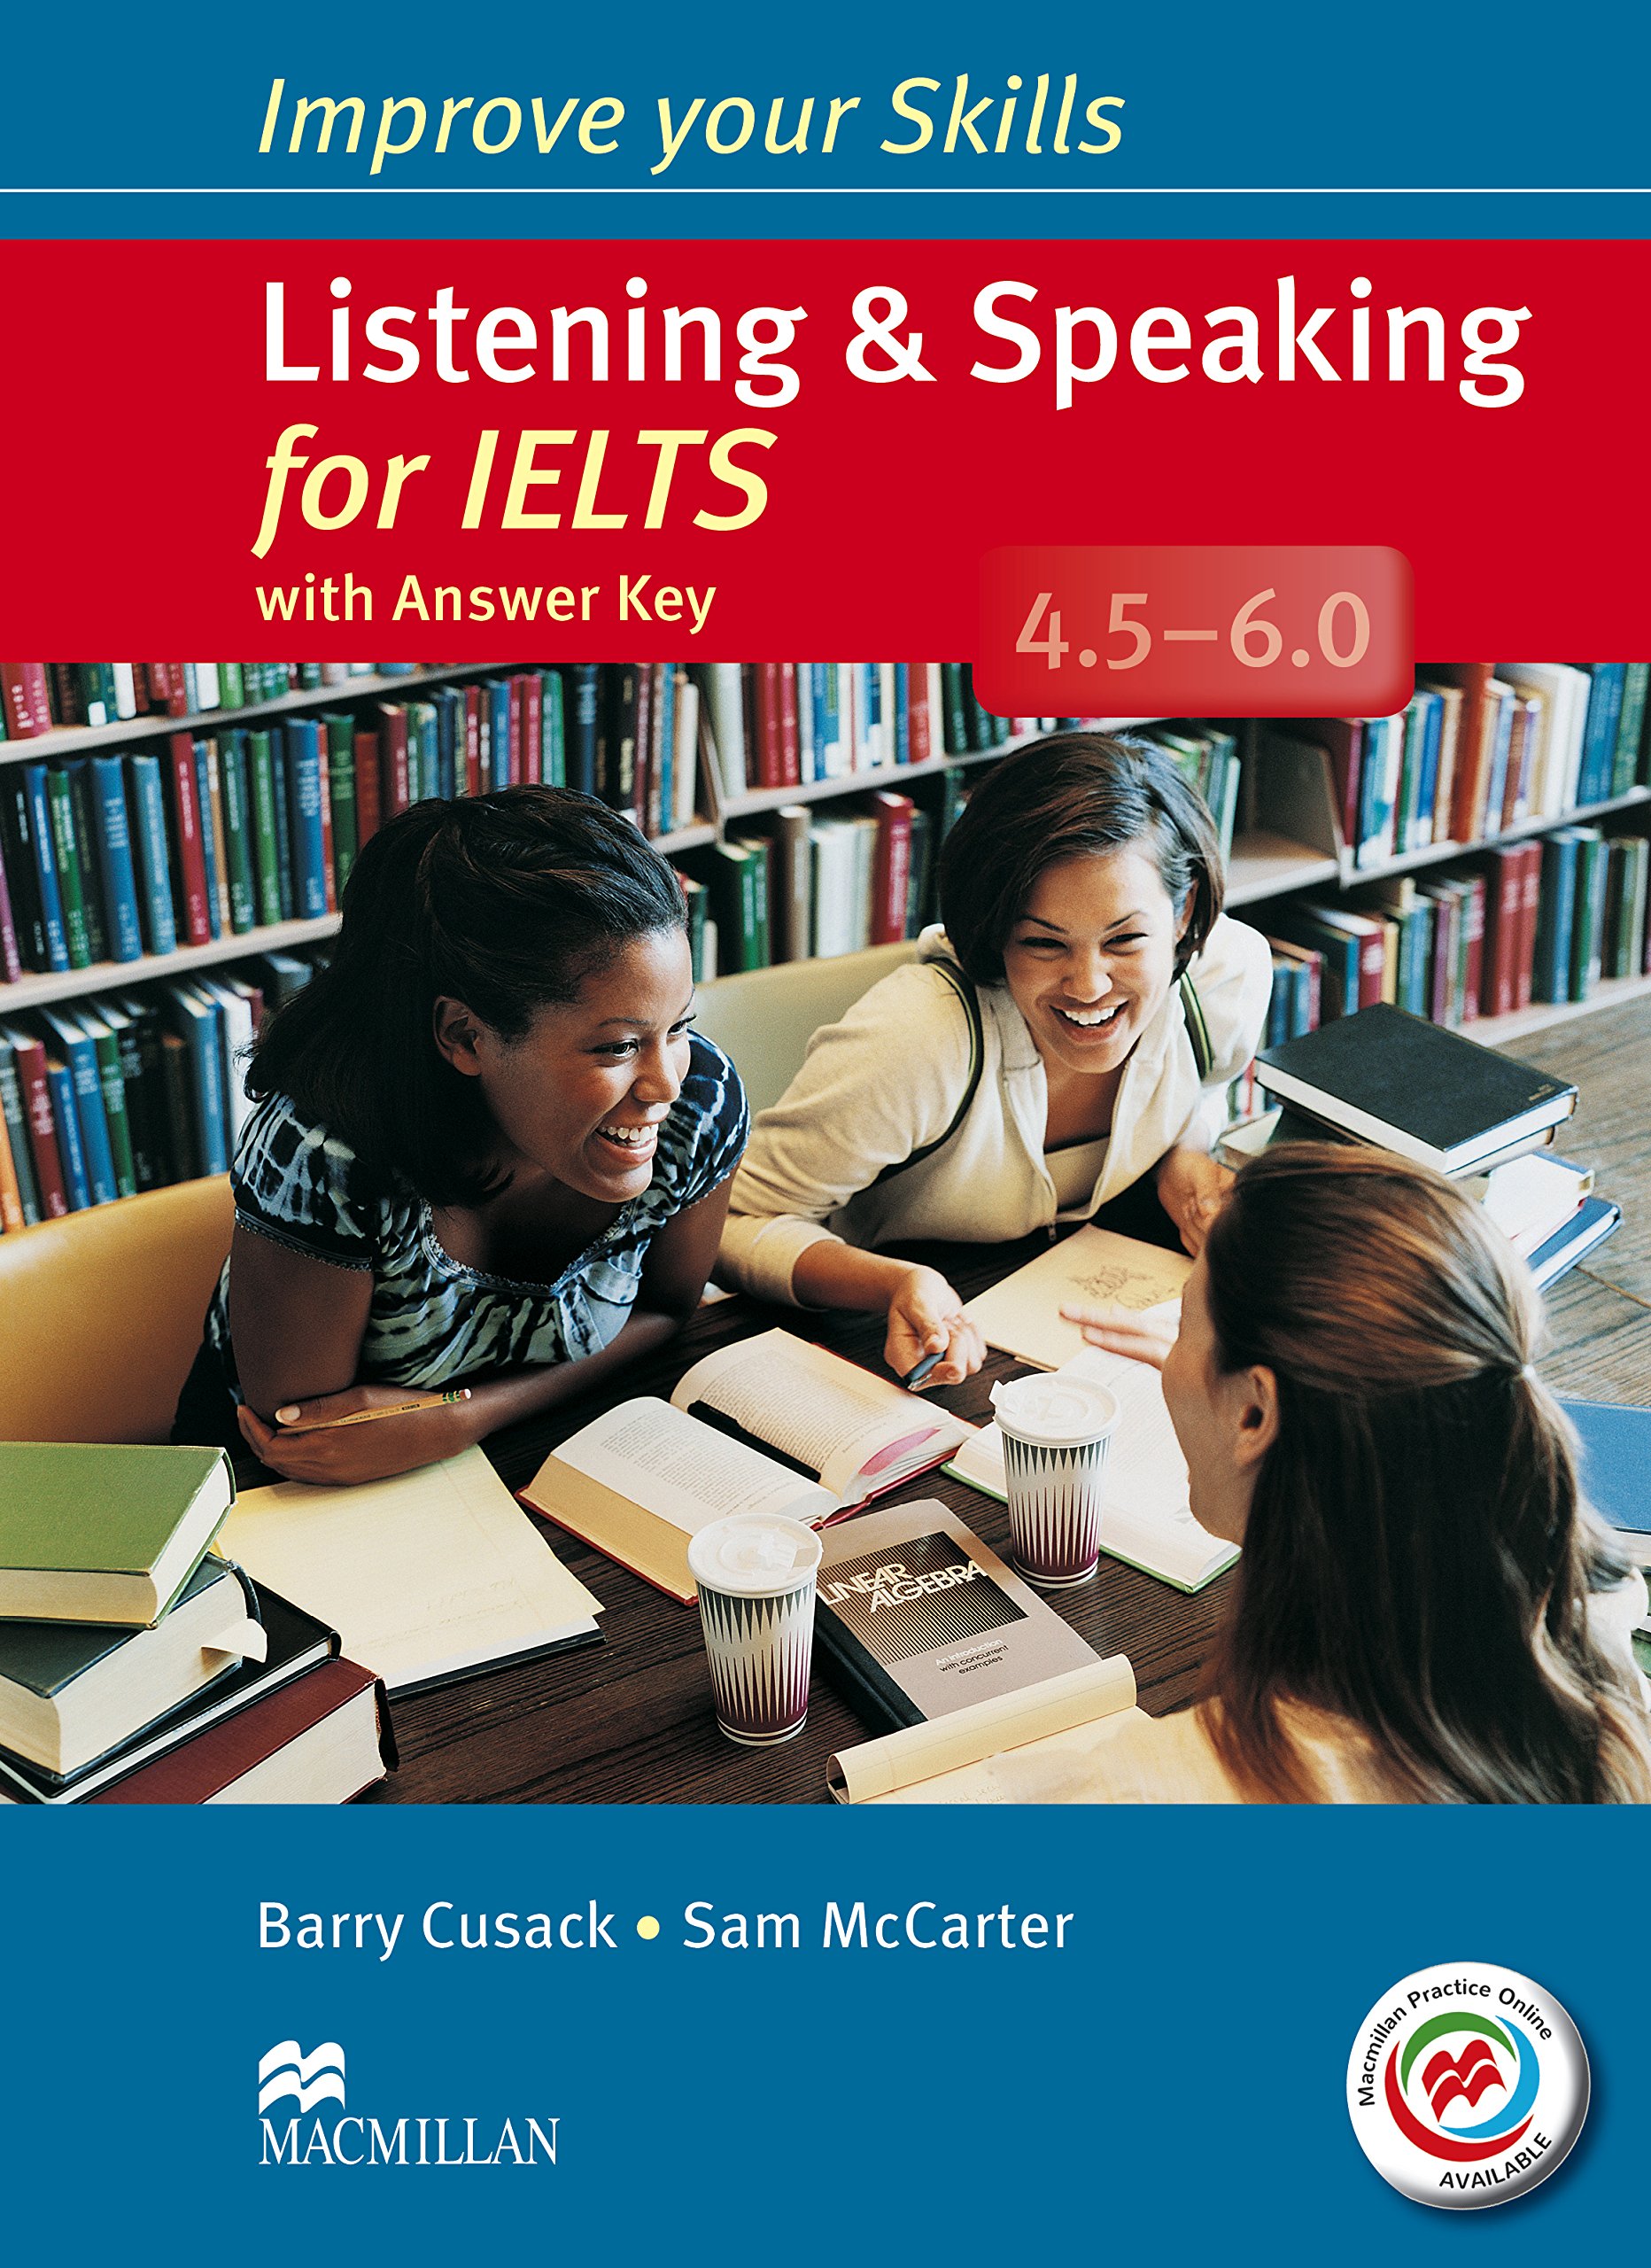 Improve Your Skills for IELTS 4.5-6 Listening & Speaking Student\'s Book with Key & Macmillan Practice Online | Barry Cusack, Sam McCarter